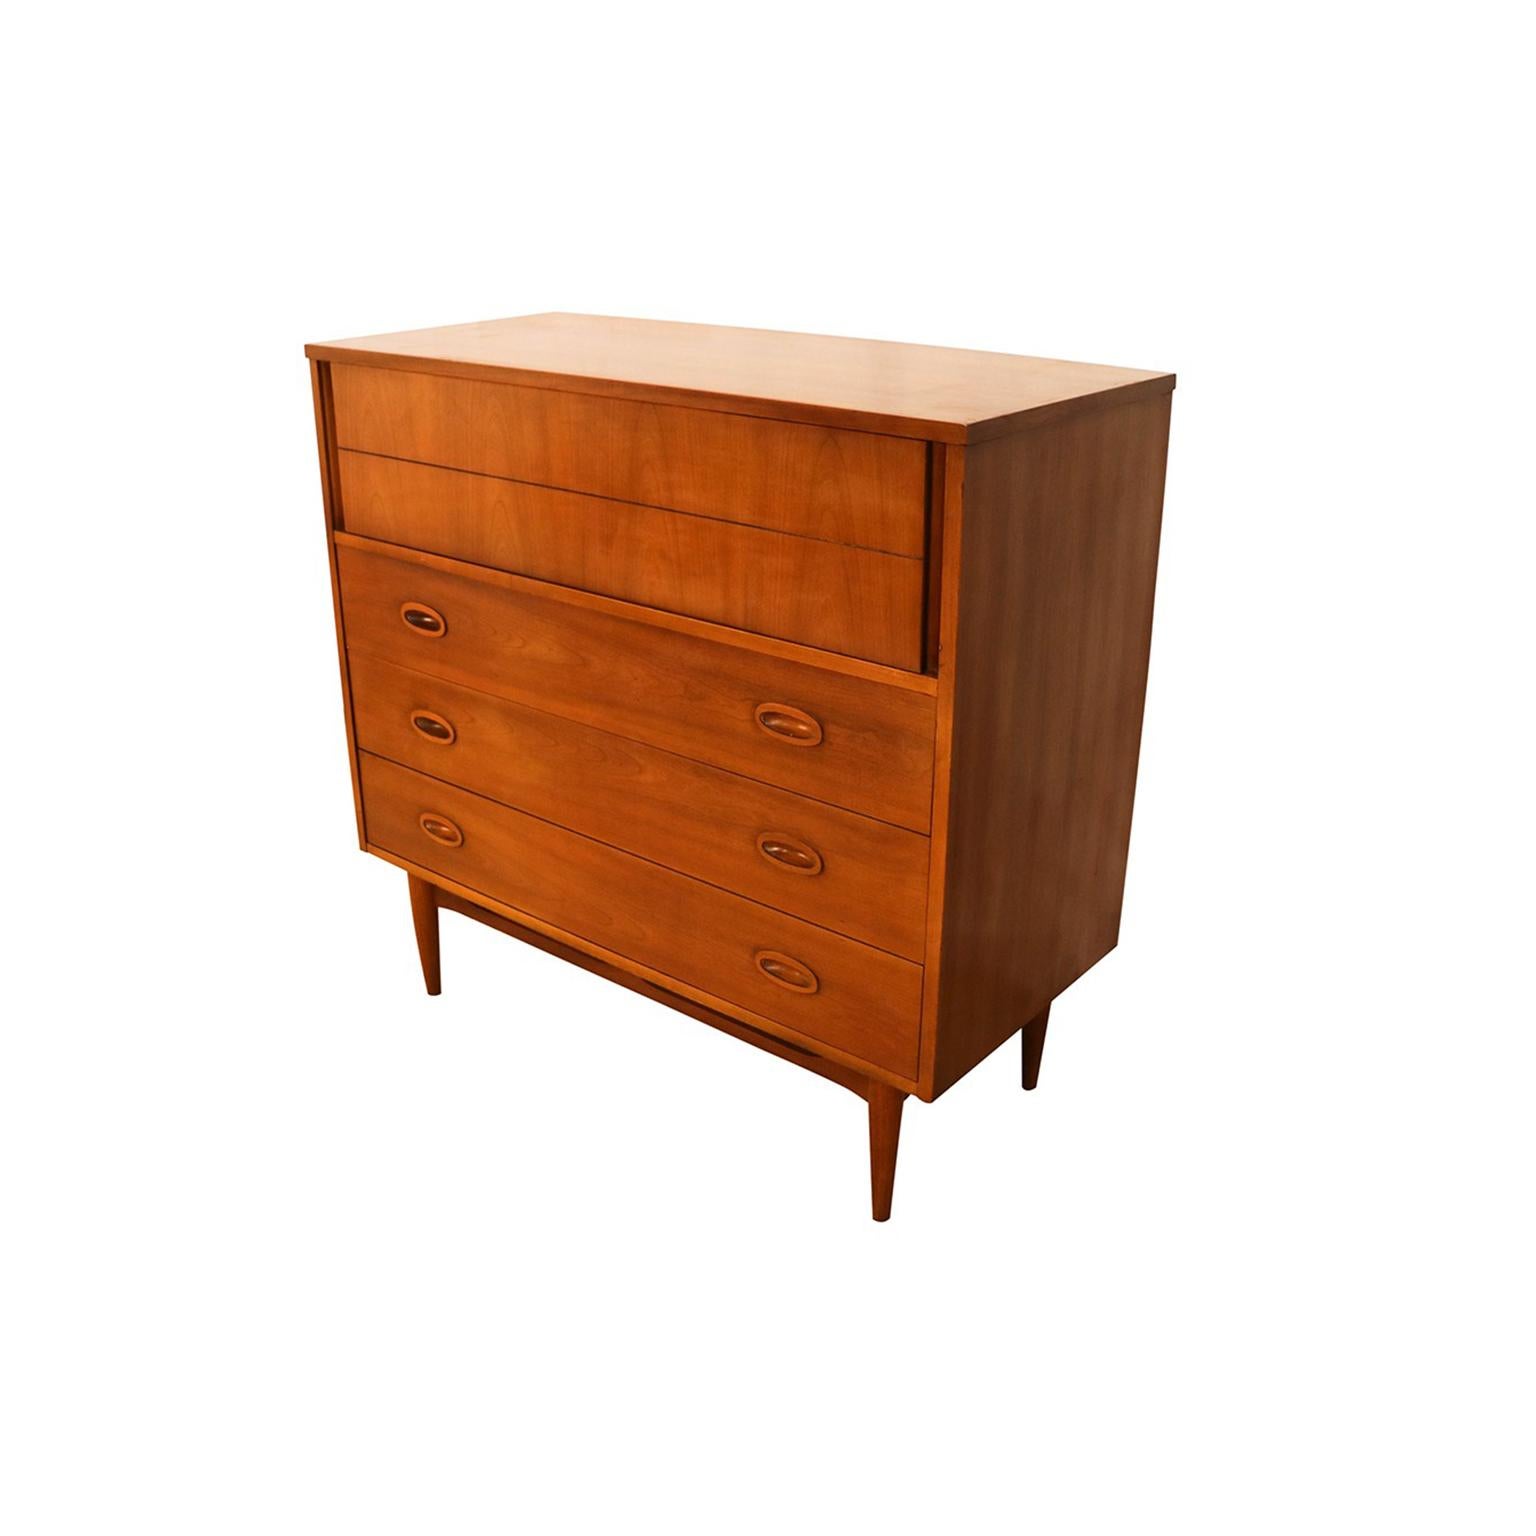 An elegant modern highboy tall dresser. This is a beautiful example of midcentury craftsmanship by Dixie Furniture, features four deep drawers for plenty of storage, with manufacturer’s label stamped on the inside of drawer (Dixie). An extremely